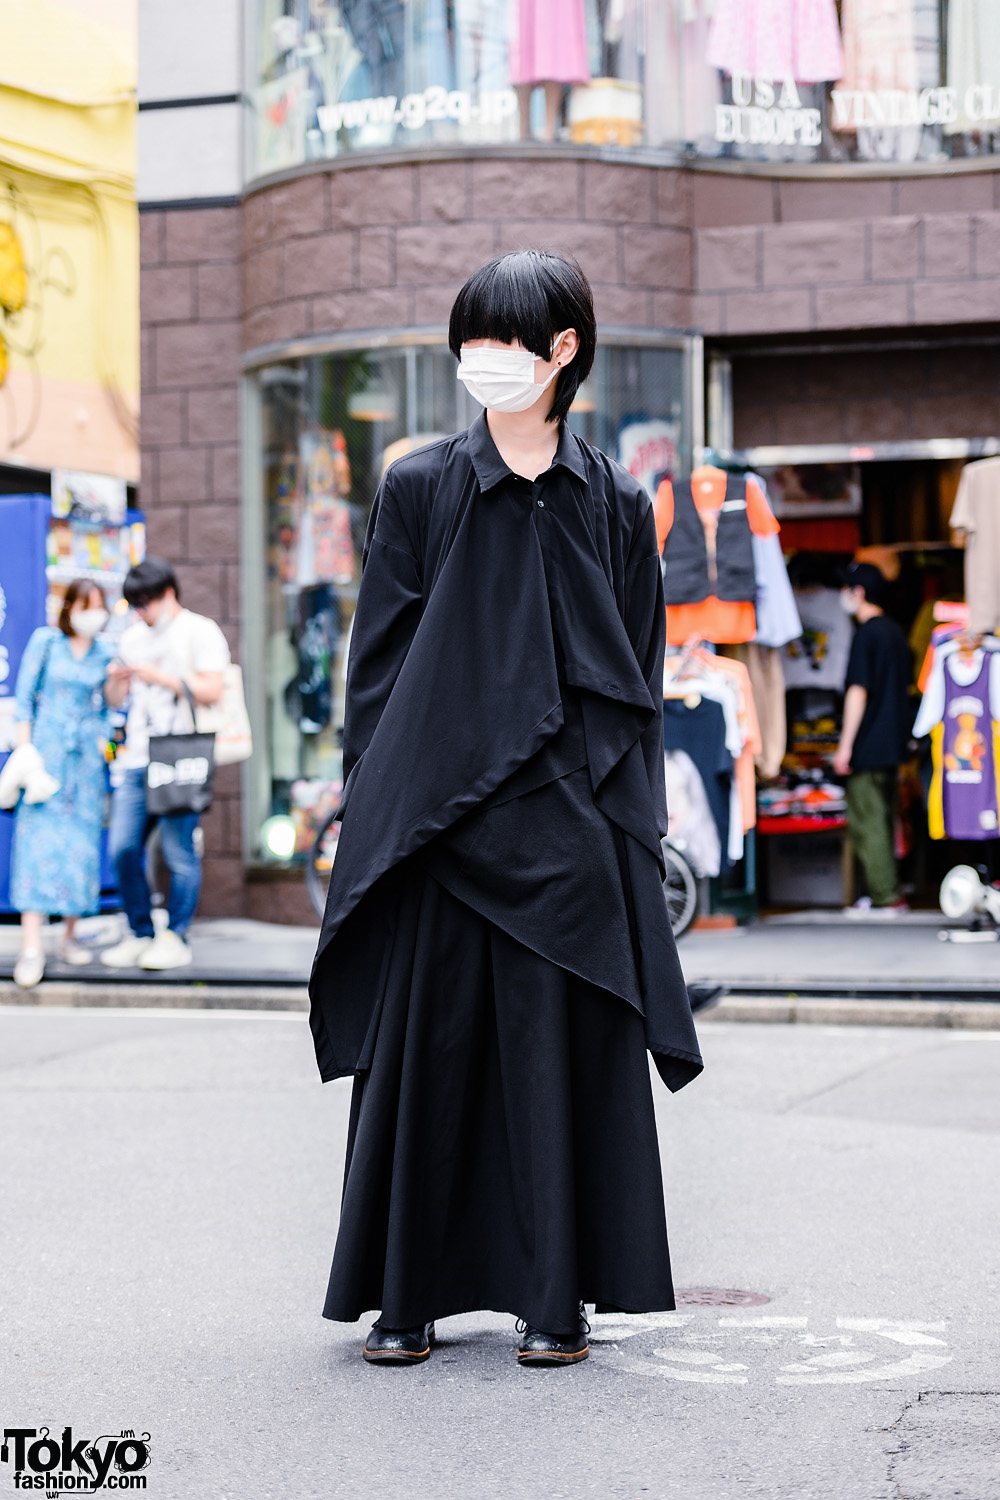 Monochrome Minimalist GGD Tokyo Street Style in Harajuku w/ Face Mask, Asymmetrical Top, Maxi Skirt & Foot Style Boots